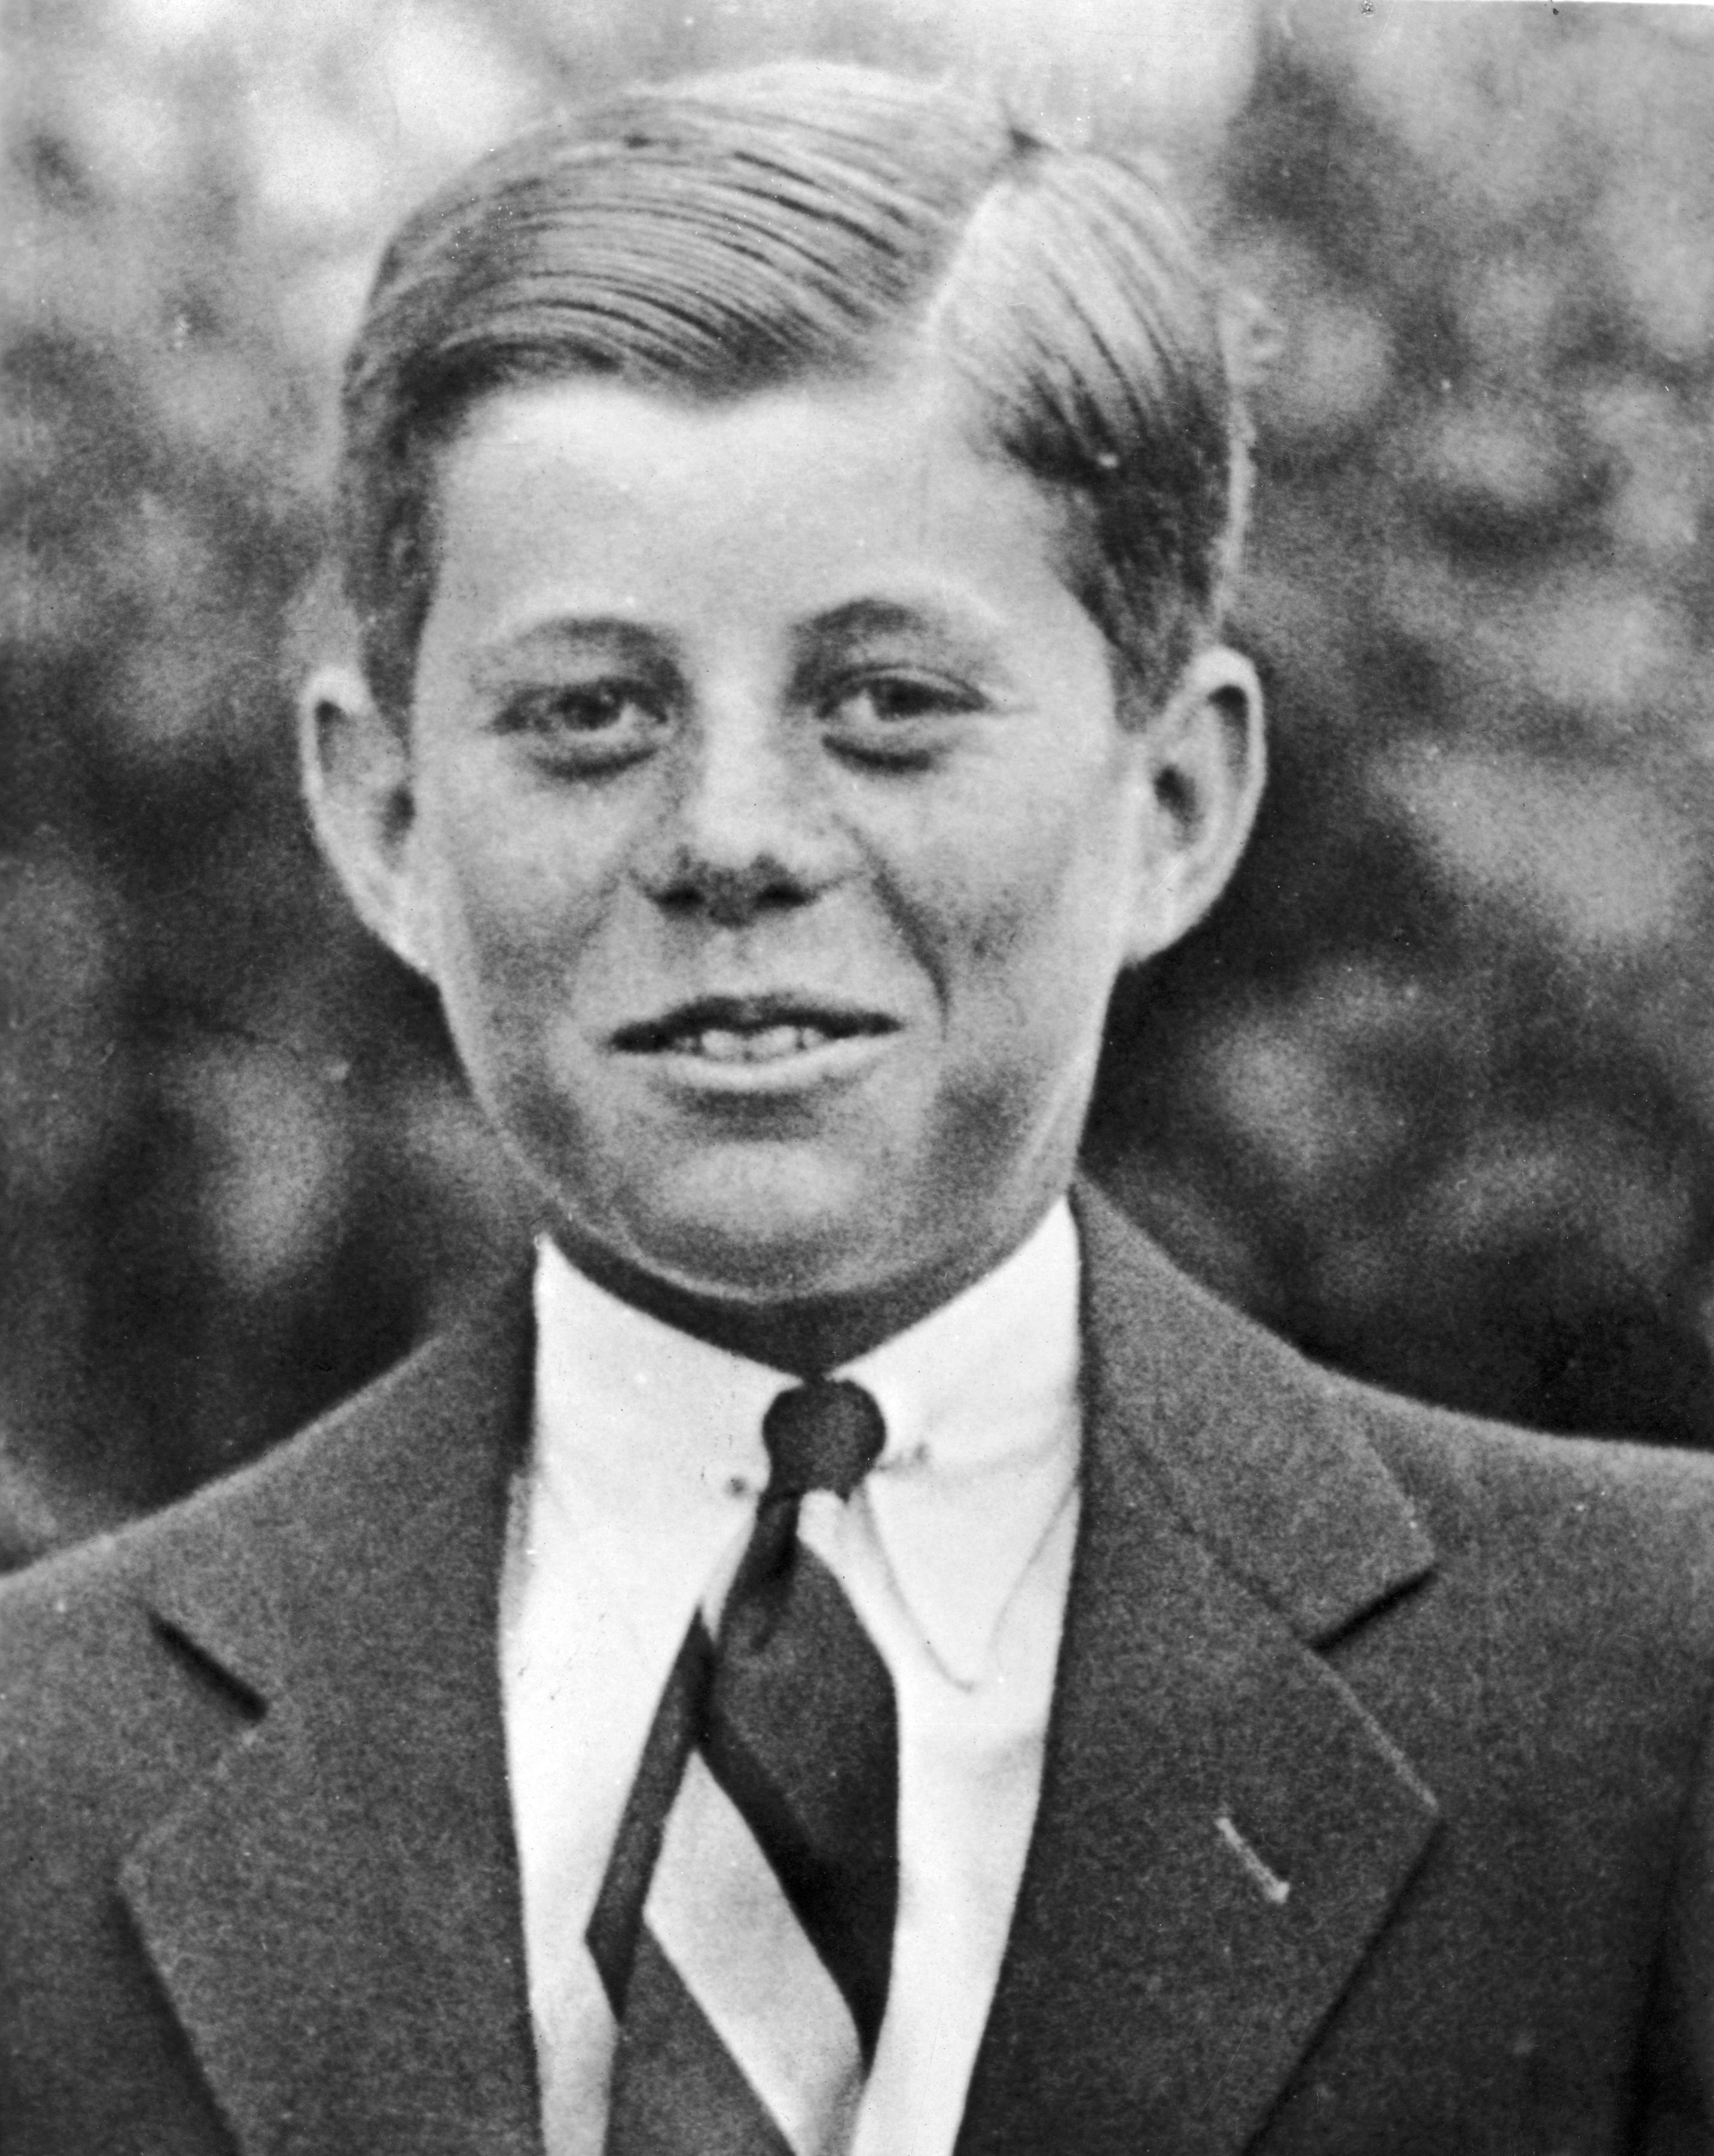 John F. Kennedy Photo of JFK's Life to Tribute His